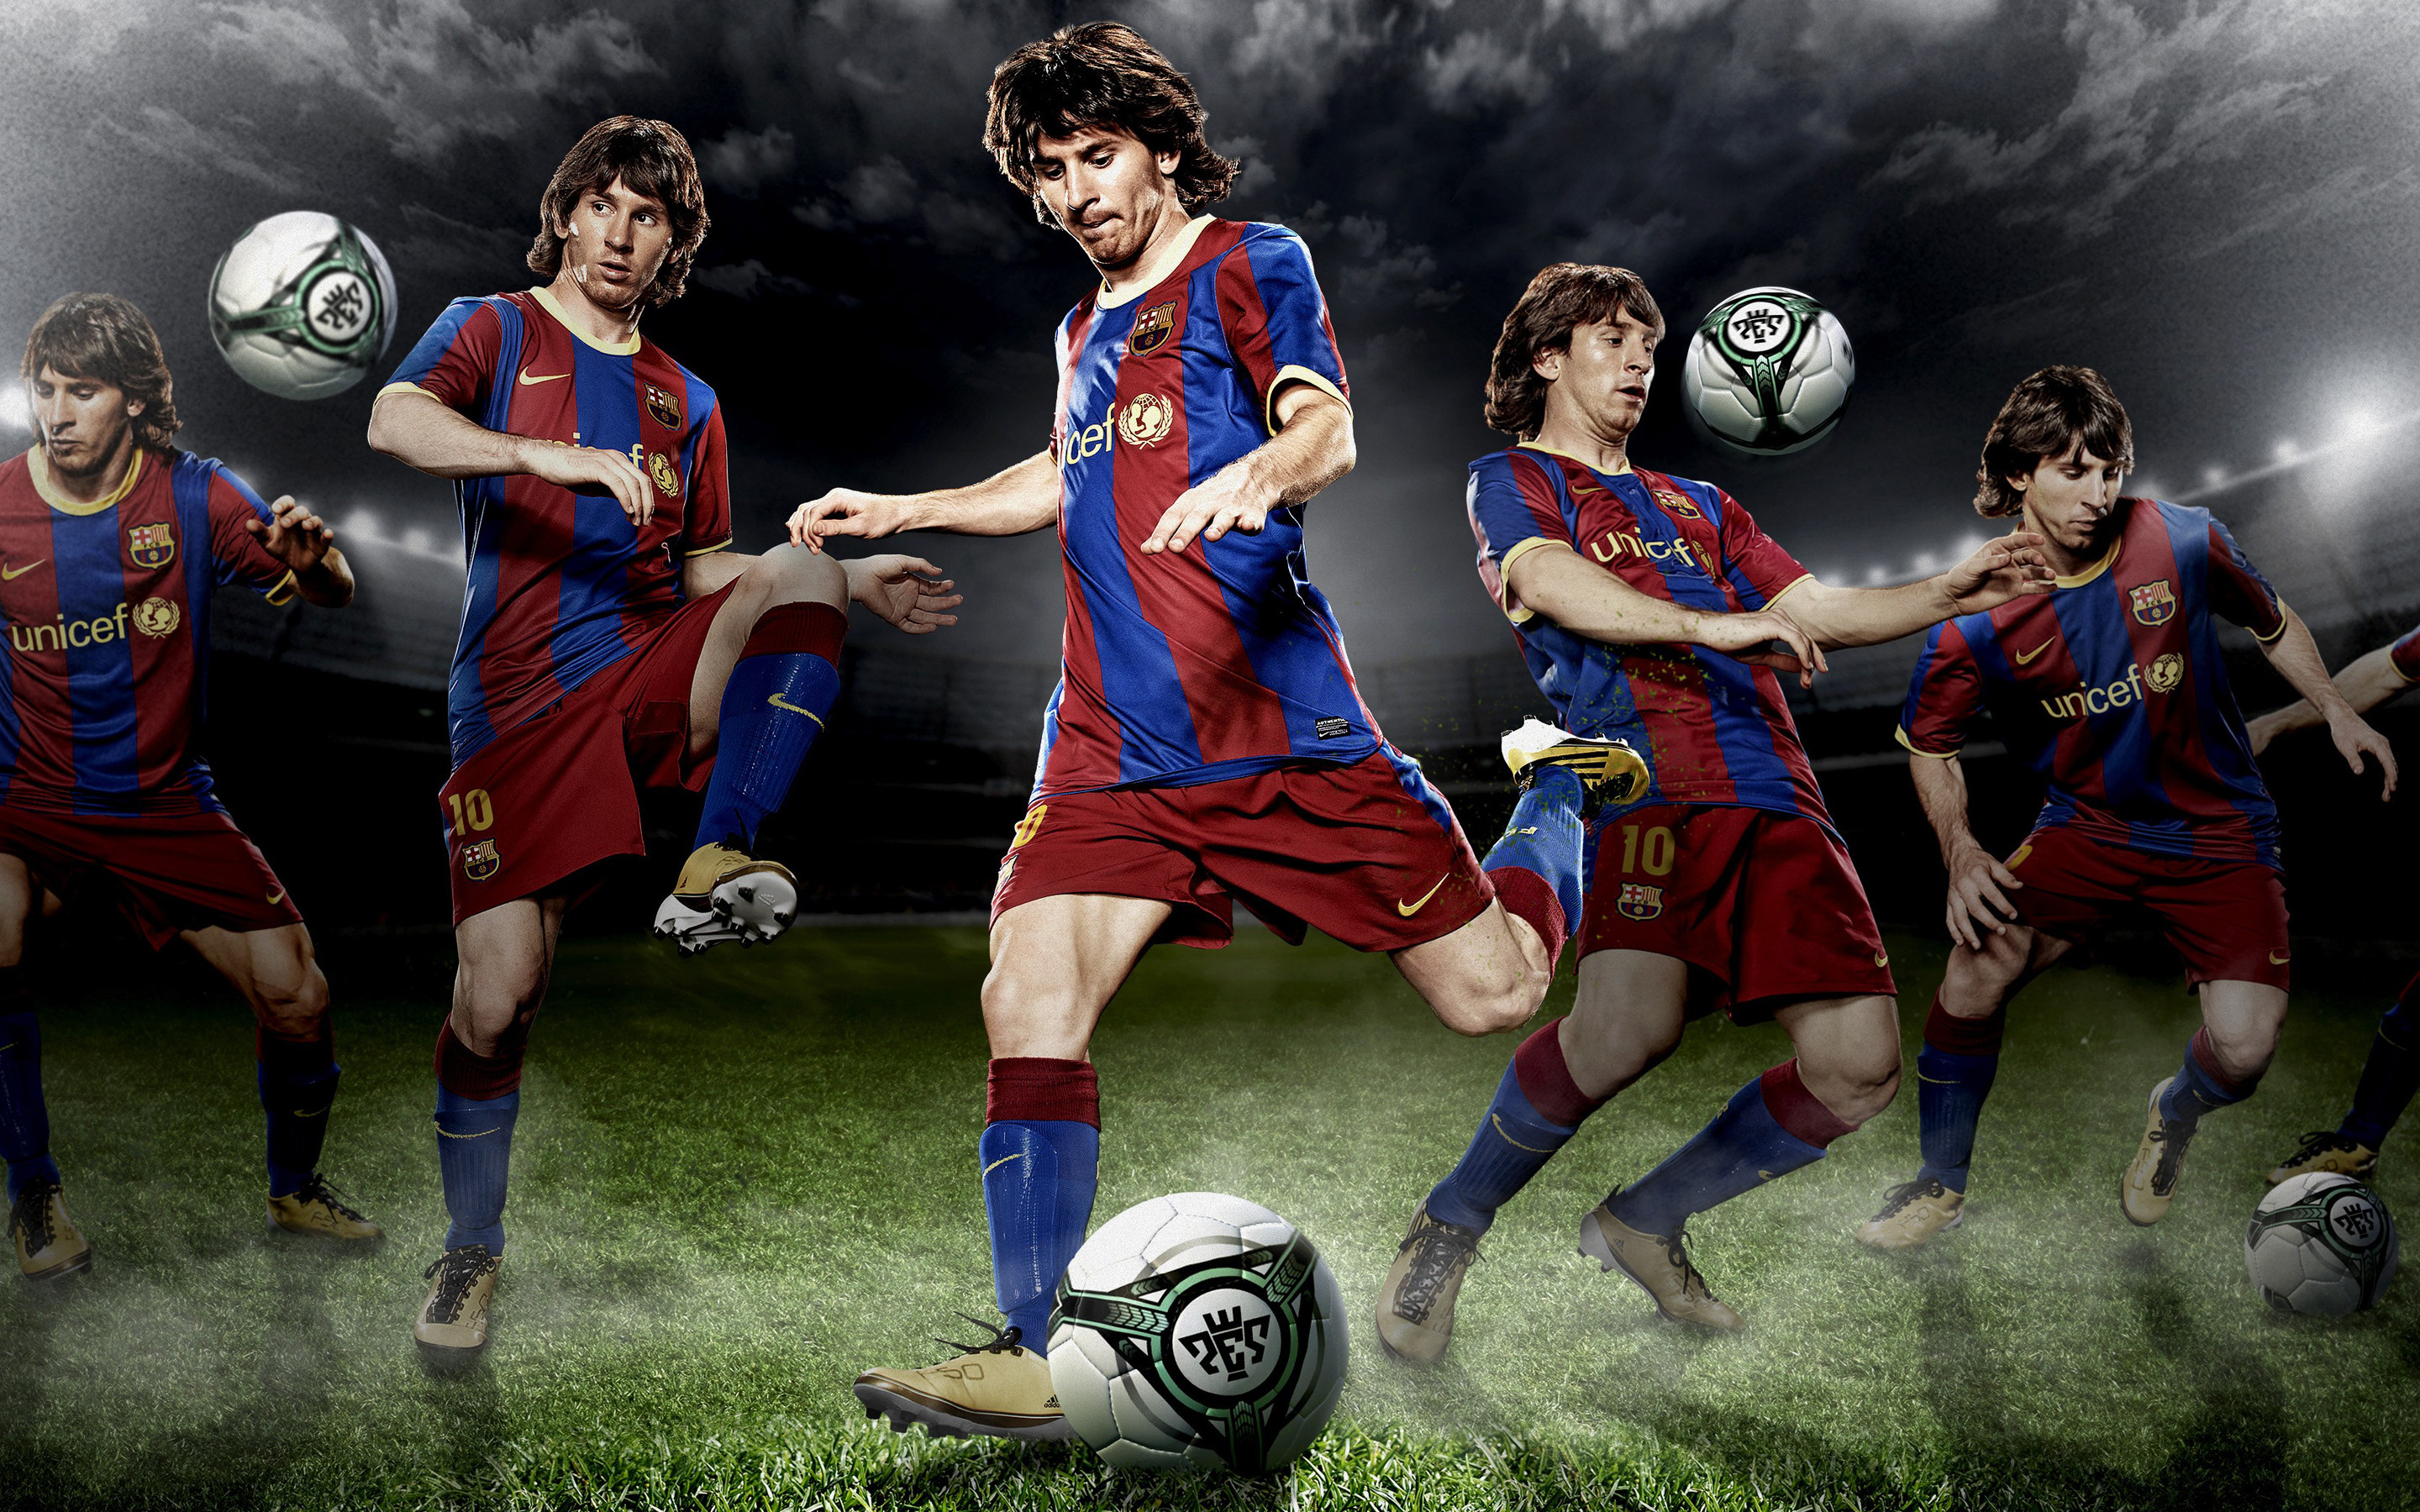 68 Soccer Players Wallpapers on WallpaperPlay